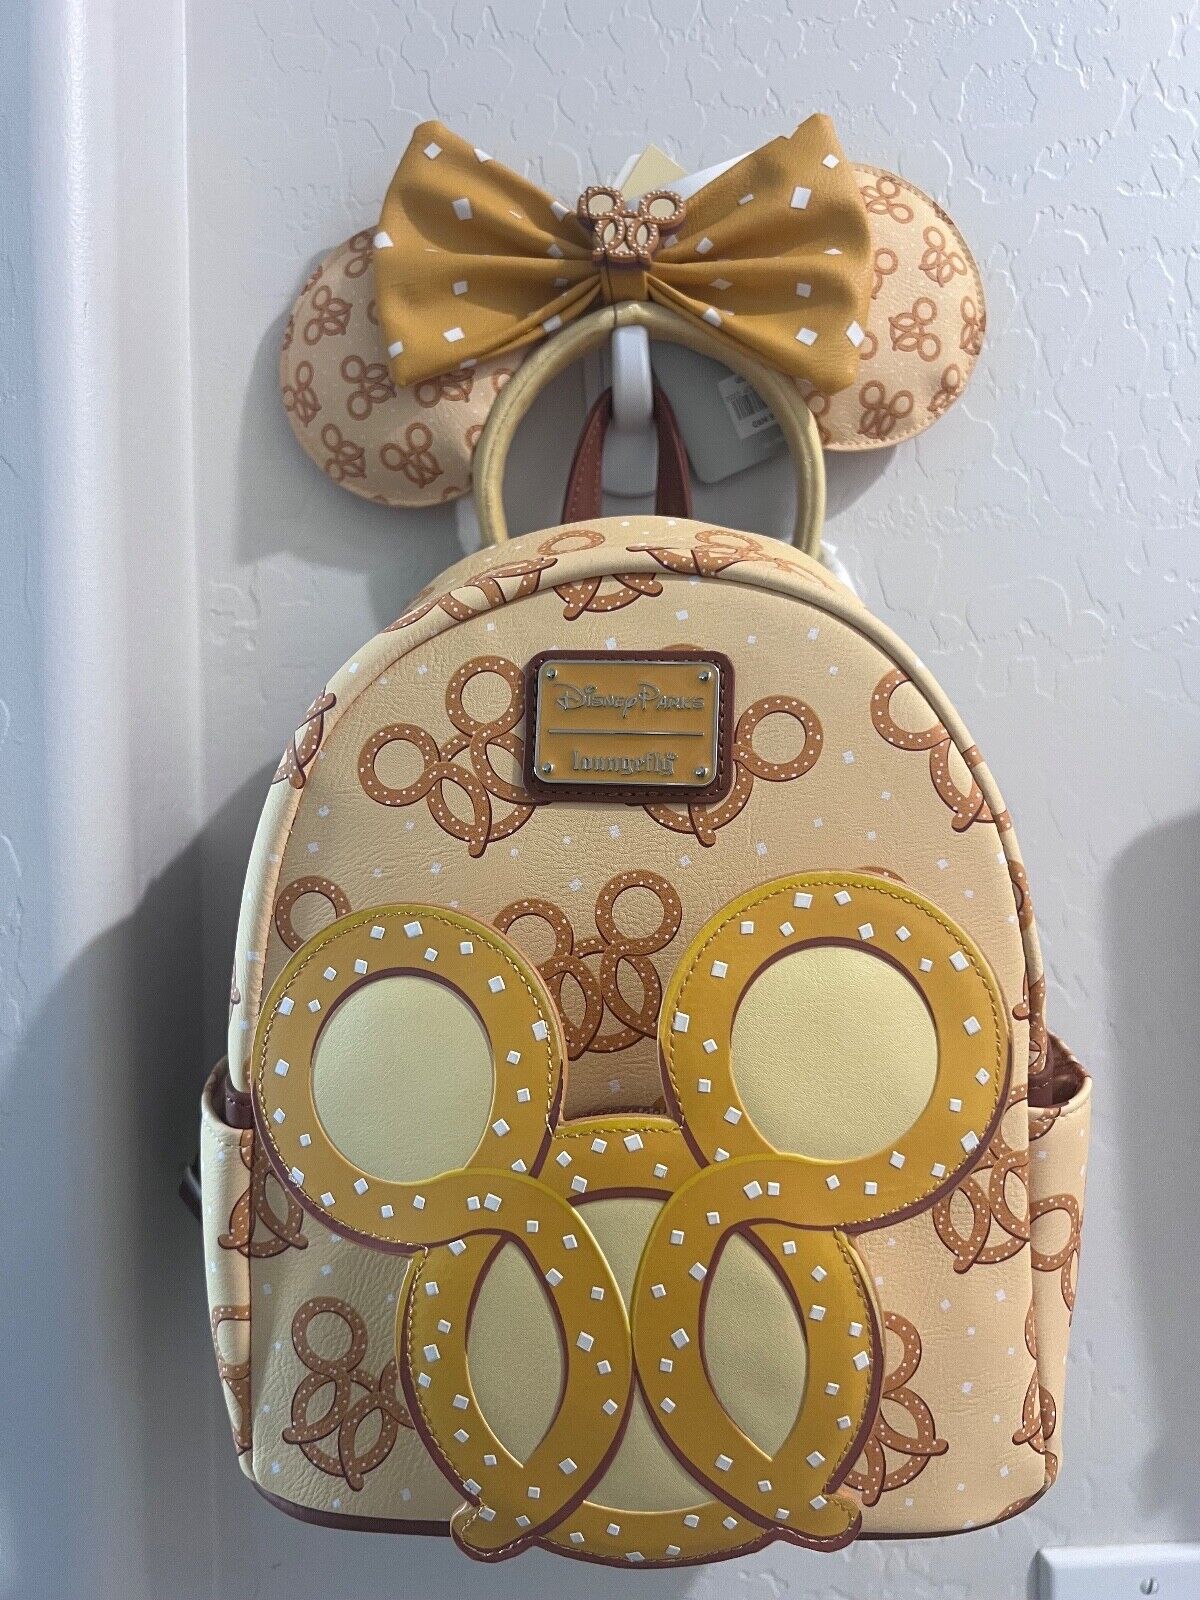 NWT Disney Parks Pretzel Loungefly Mini Backpack and Ears Perfect Condition